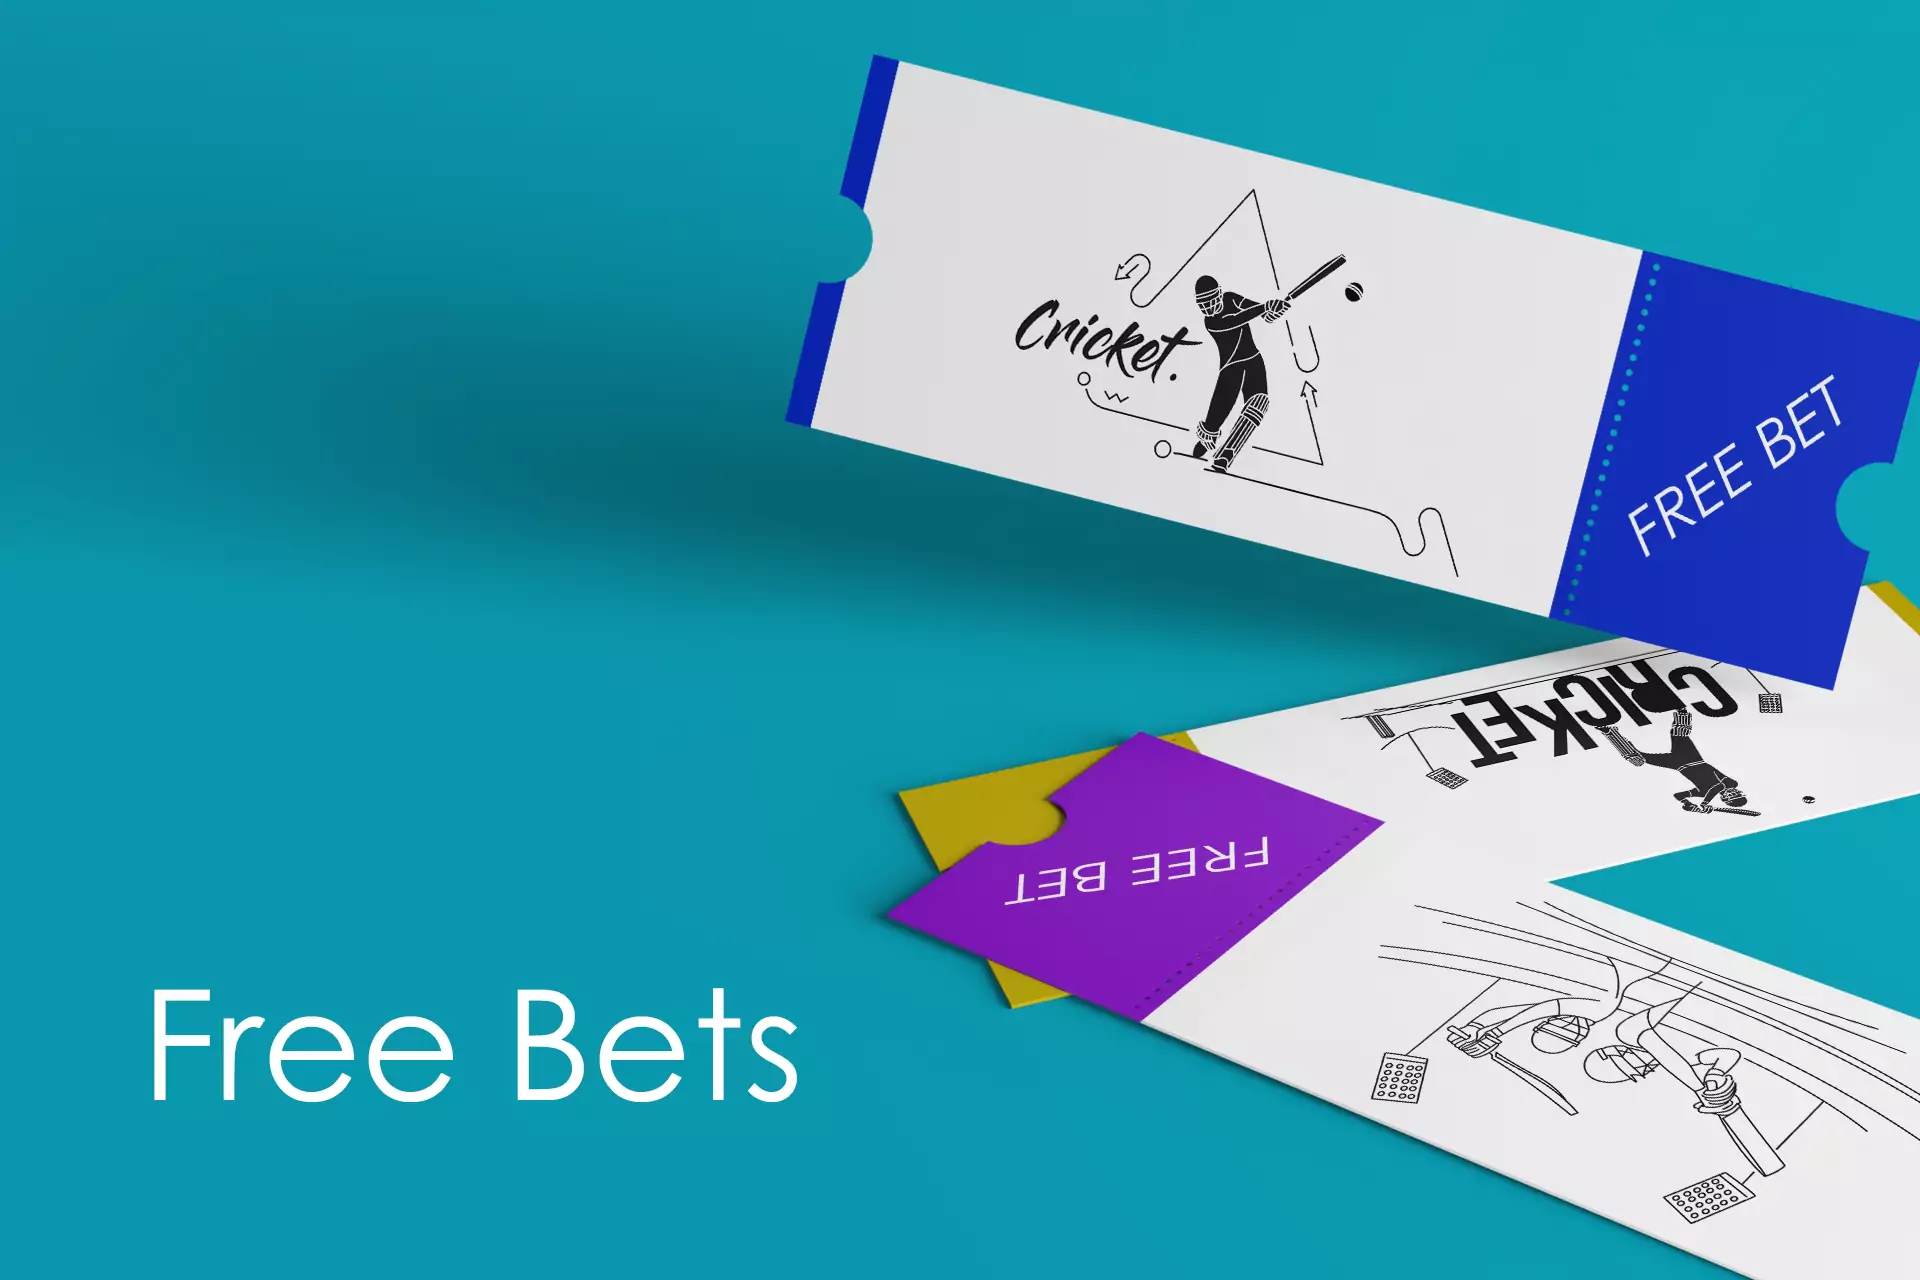 Use free bets to increase your profit.